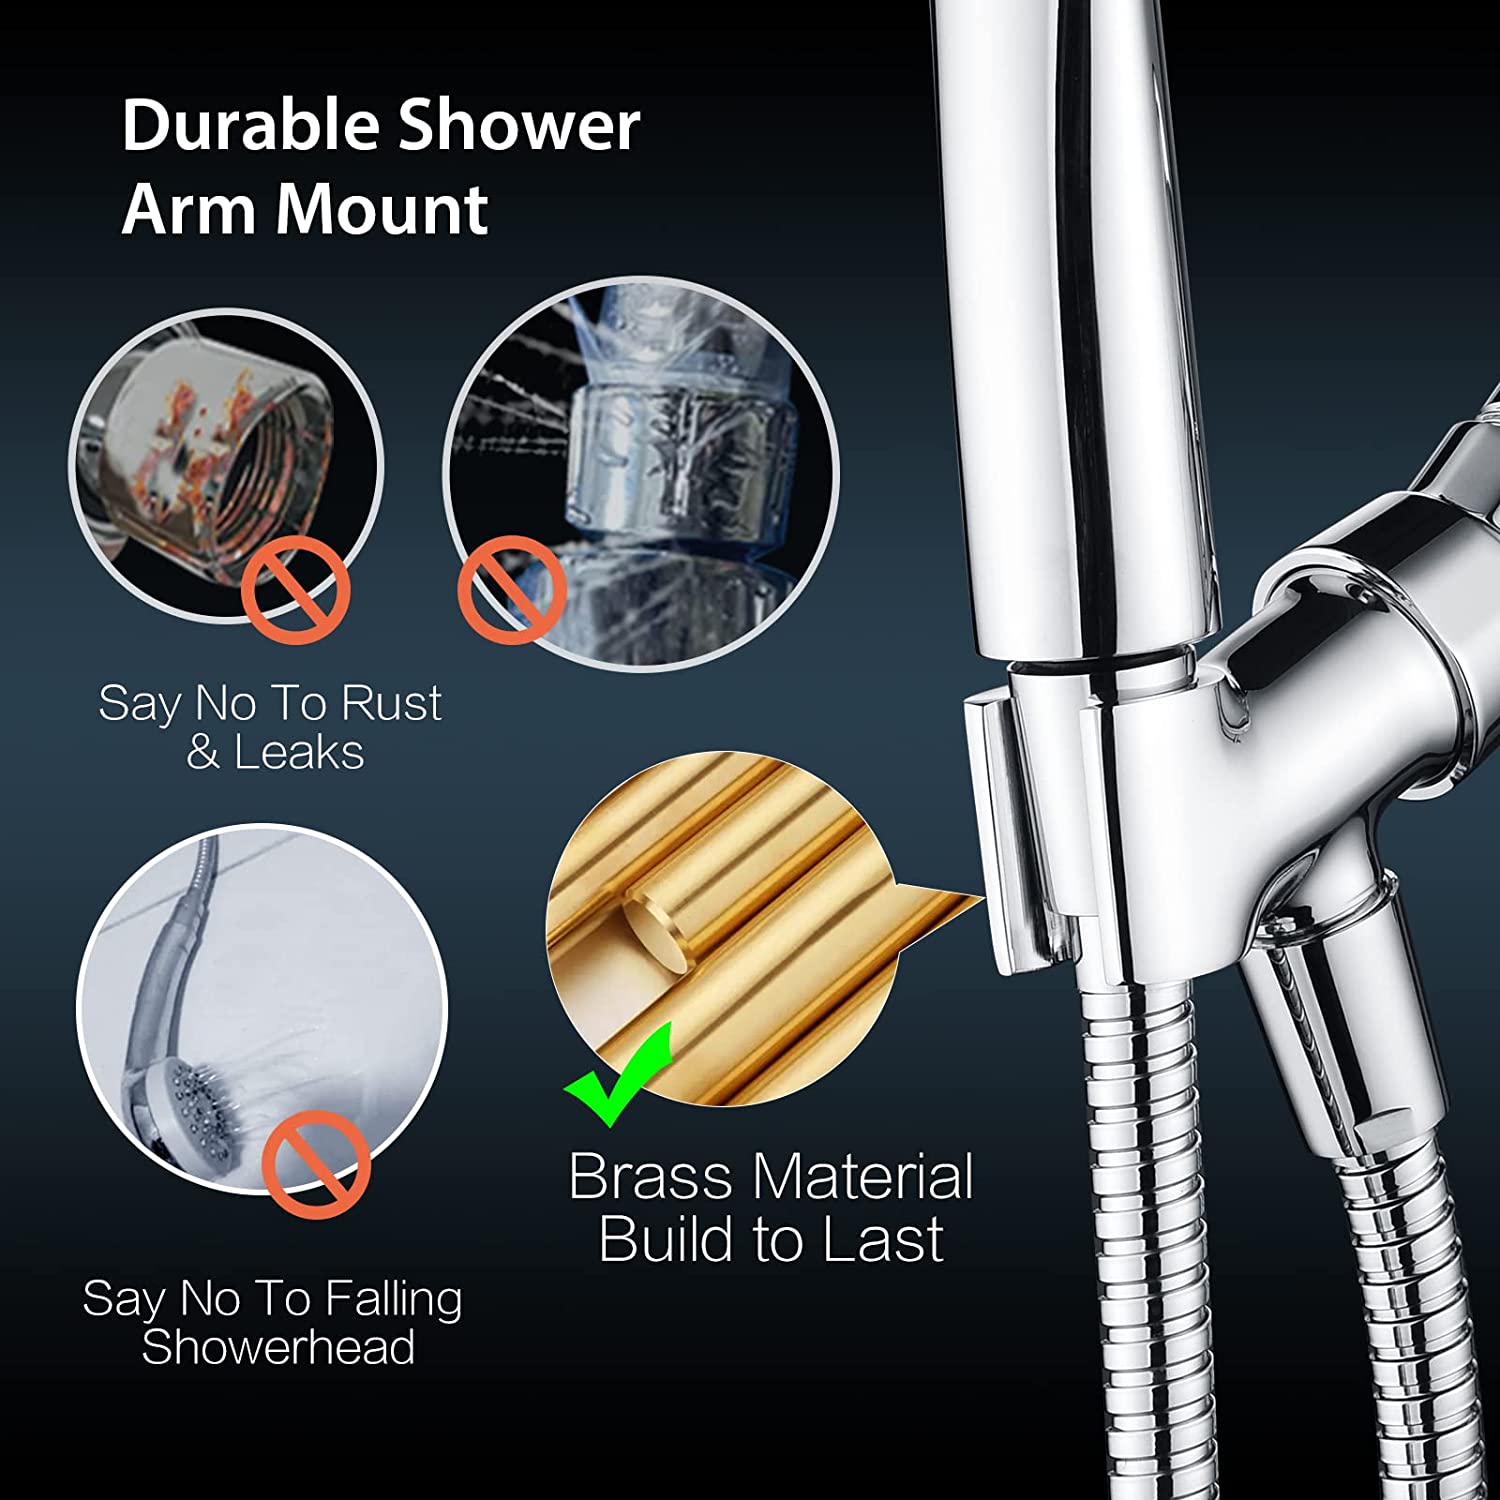 BRIGHT SHOWERS All Metal Shower Head Holder for Handheld Shower Head,  Adjustable Shower Arm Mount with Universal Wall Hook Bracket (BBA1901)